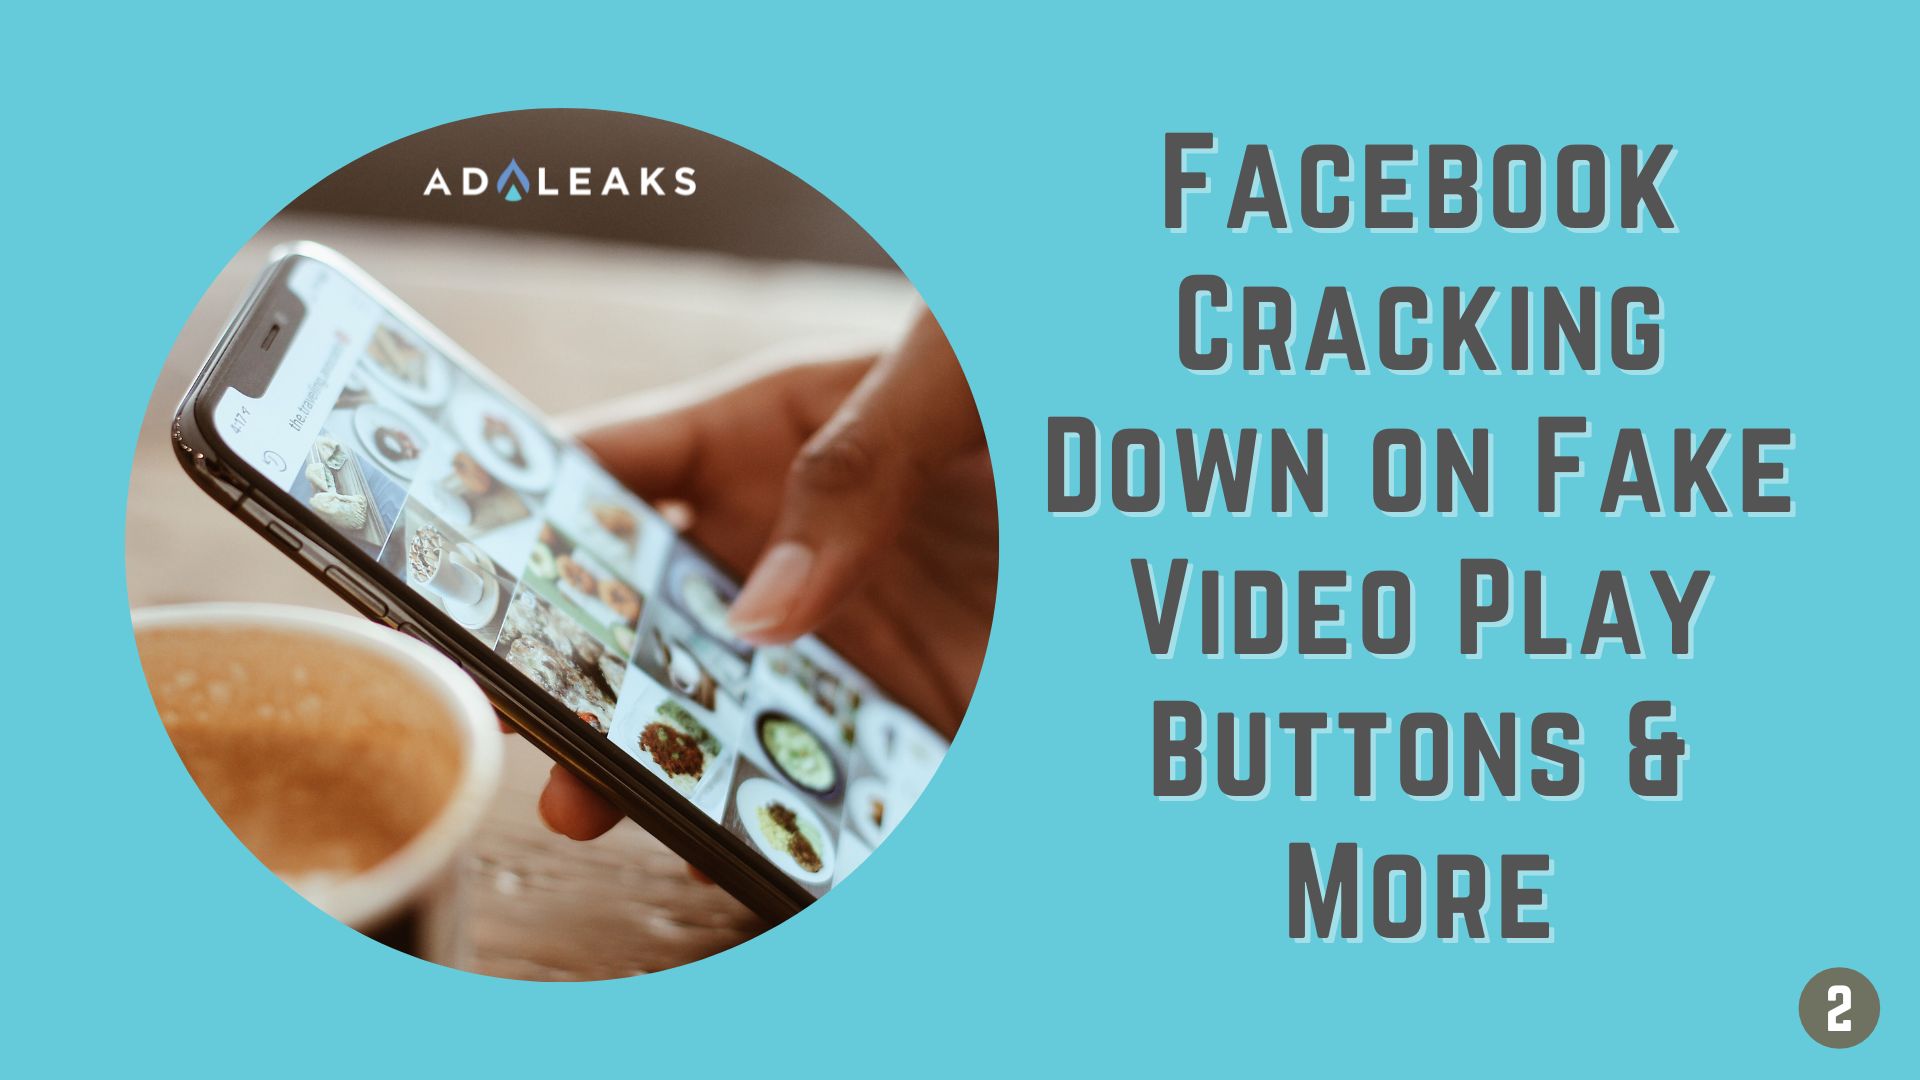 facebook cracking down on fake video play buttons & more